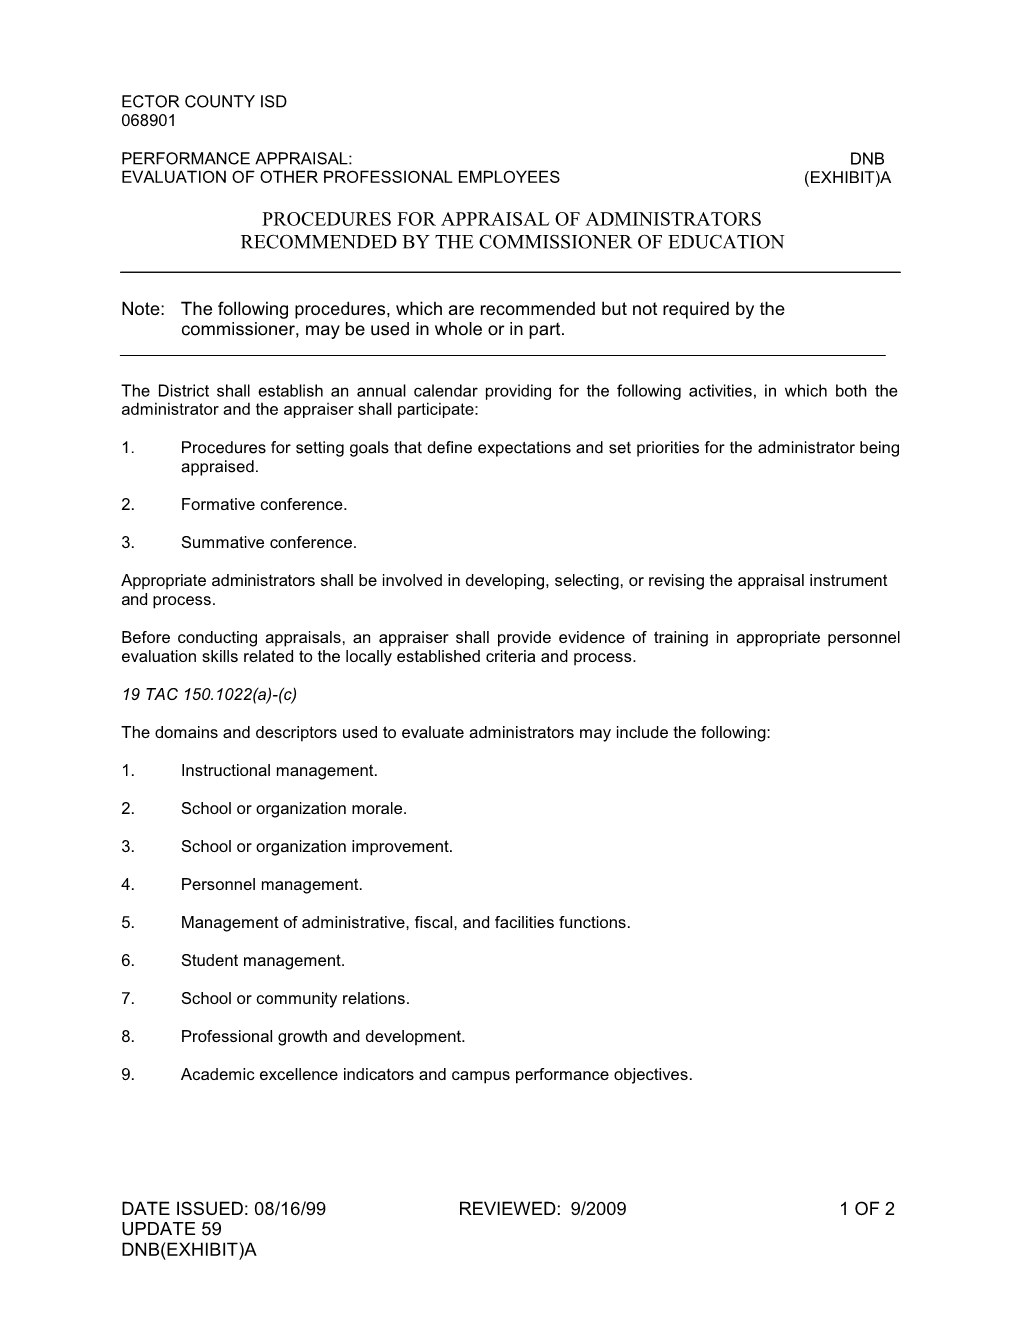 Proceduresfor Appraisalof Administrators Recommended by the Commissioner of Education